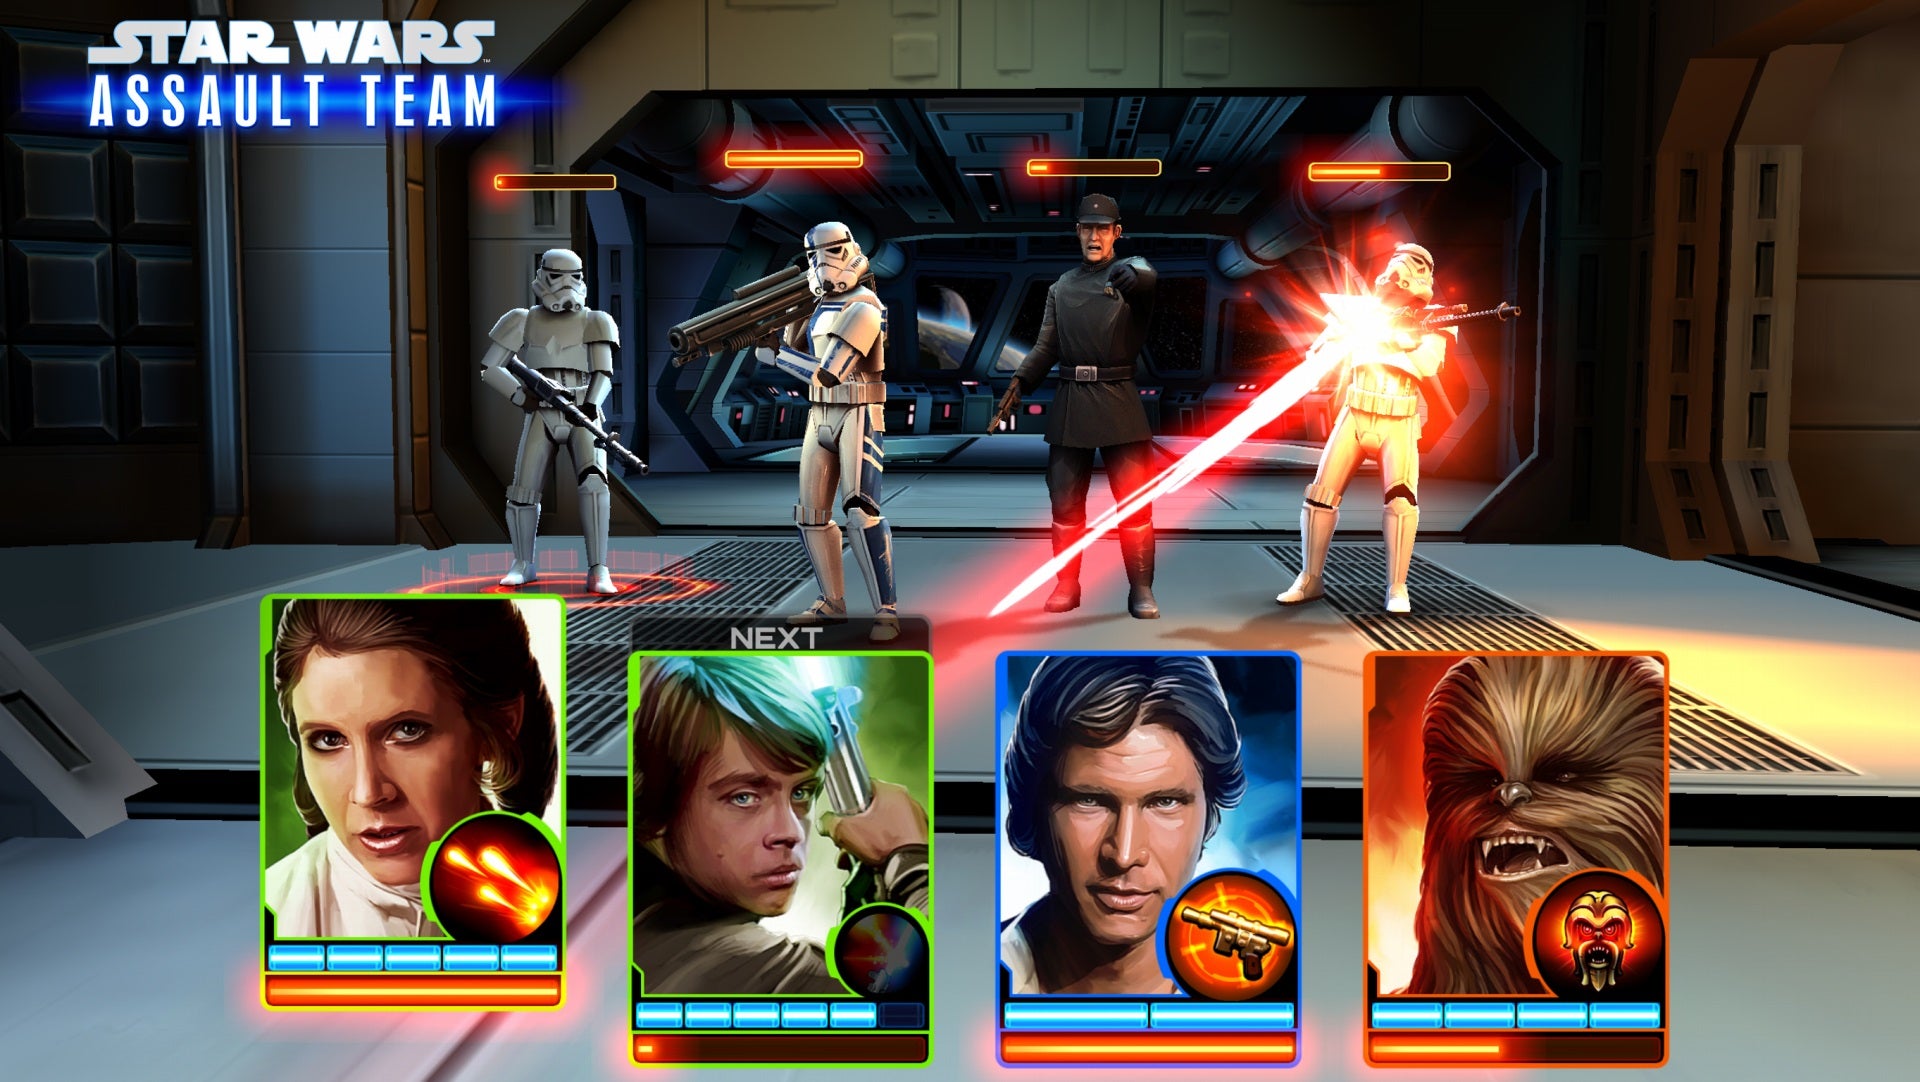 Star Wars: Assault Team turn-based game launches on Android, iOS, and Windows (Phone) 8 this spring